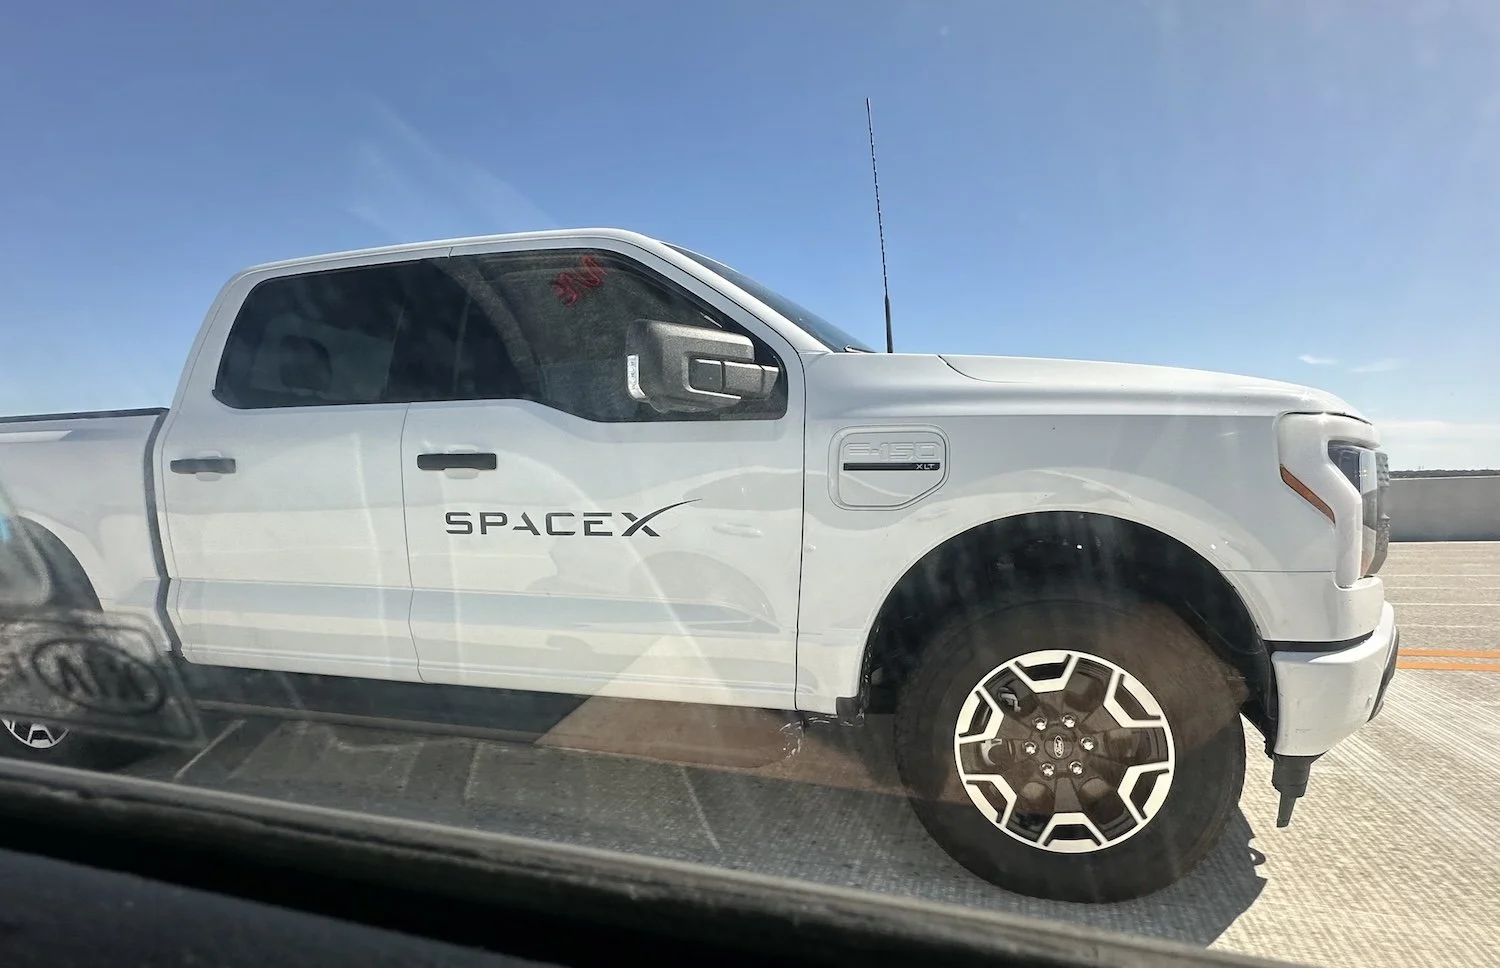 SpaceX Chooses Ford F-150 Lightning Over Tesla's Cybertruck for Rocket Launch Tasks: A Surprising Turn in Space Tech